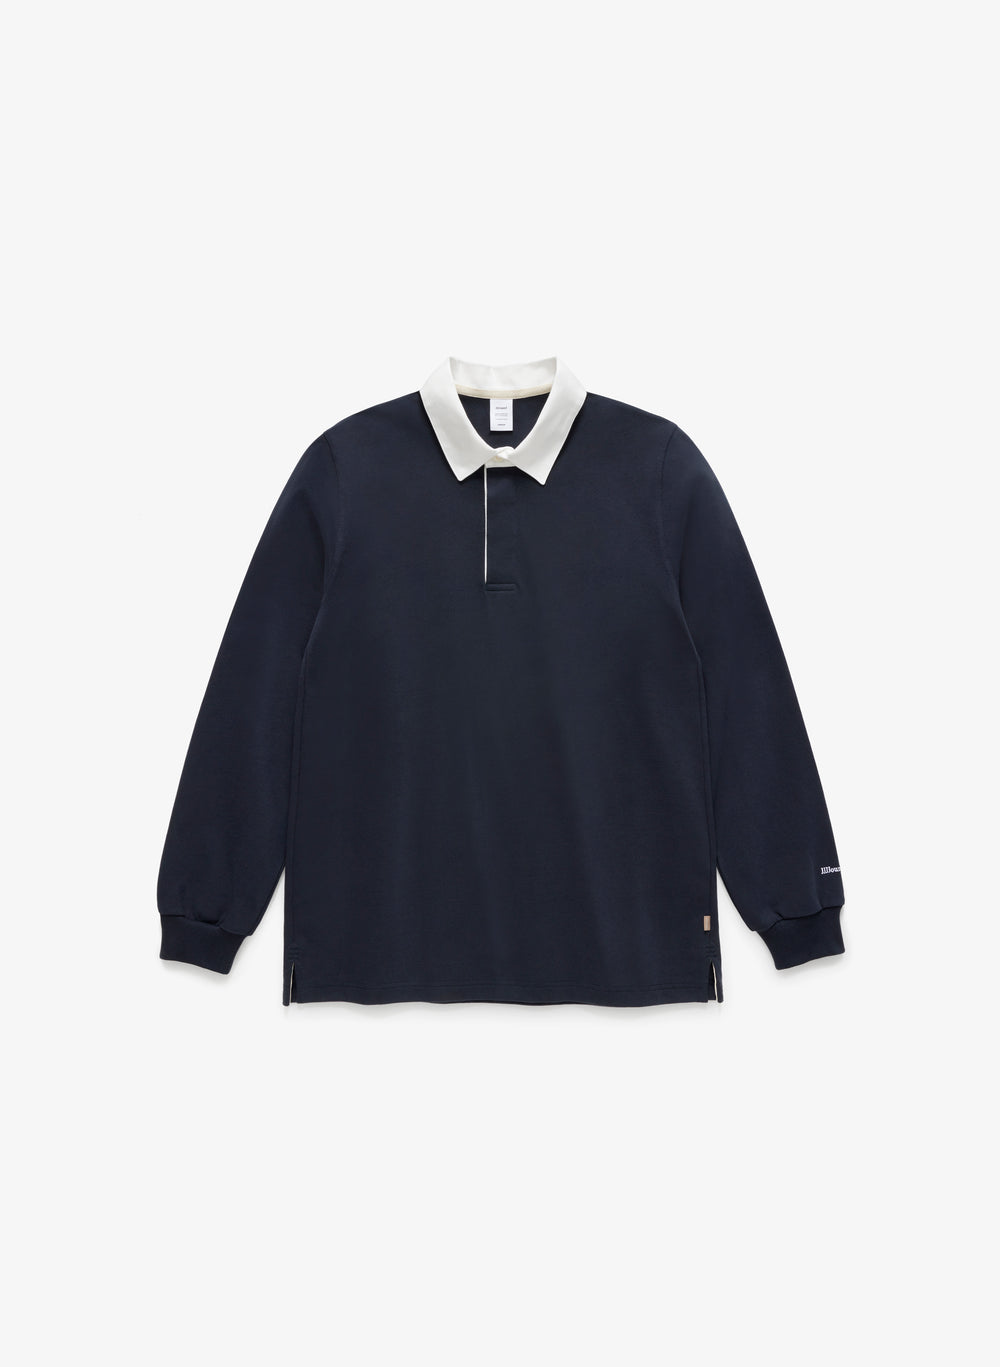 Rugby Shirt - Navy